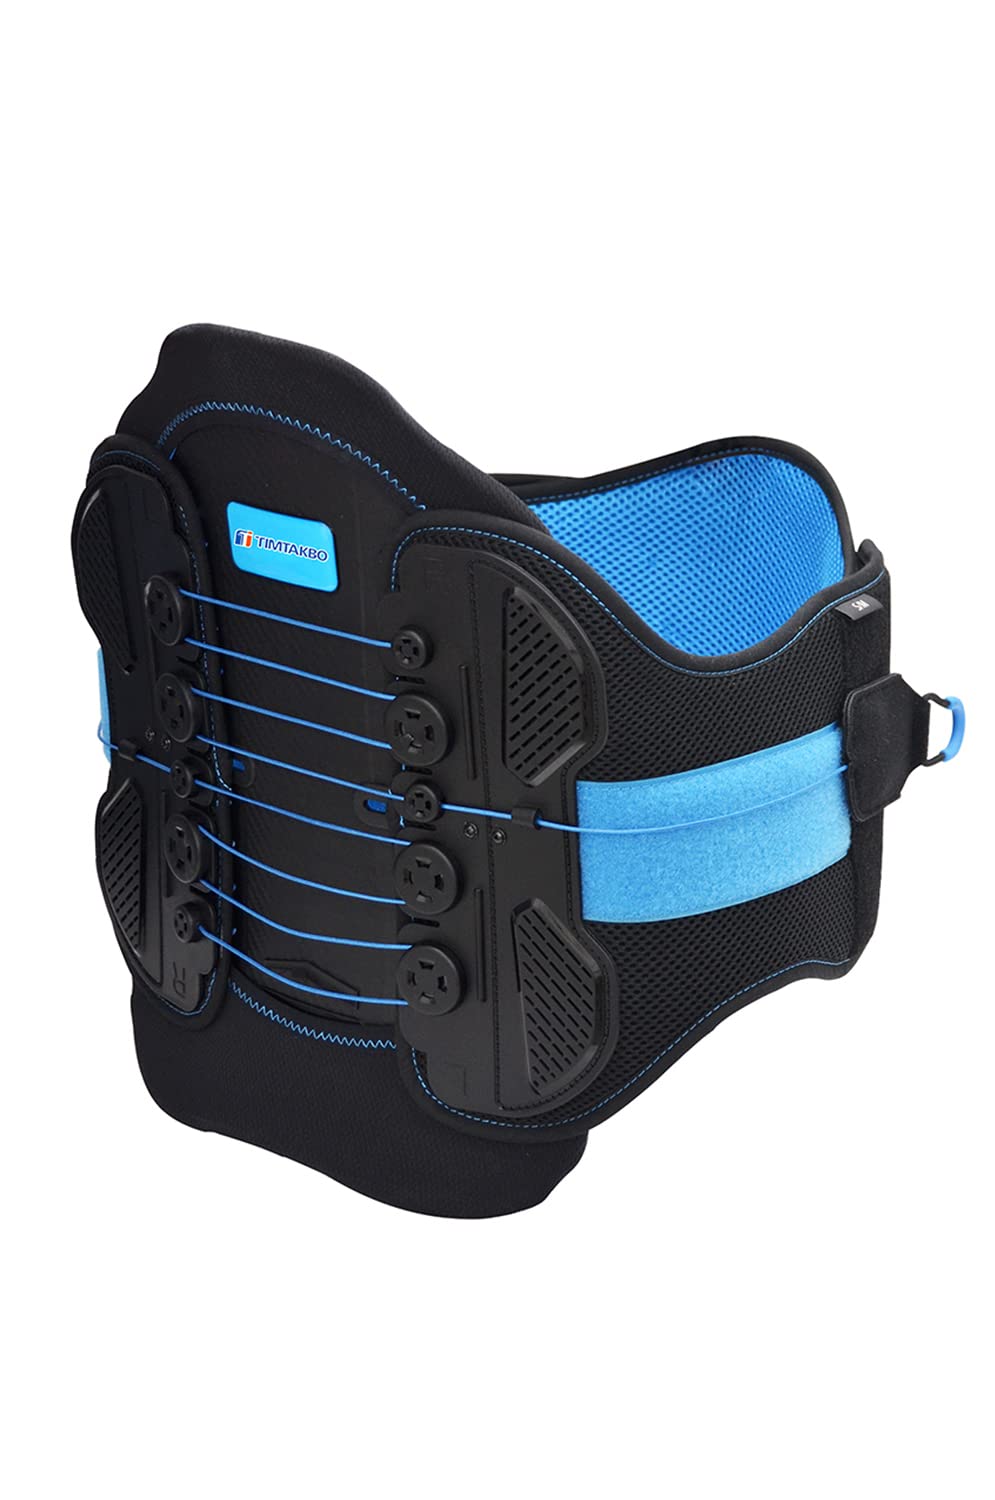 Cybertech Medical Lumbar Decompression Back Brace | Lumbosacral Corset Belt for Spinal Disc Injury & Surgery Pain Relief - S